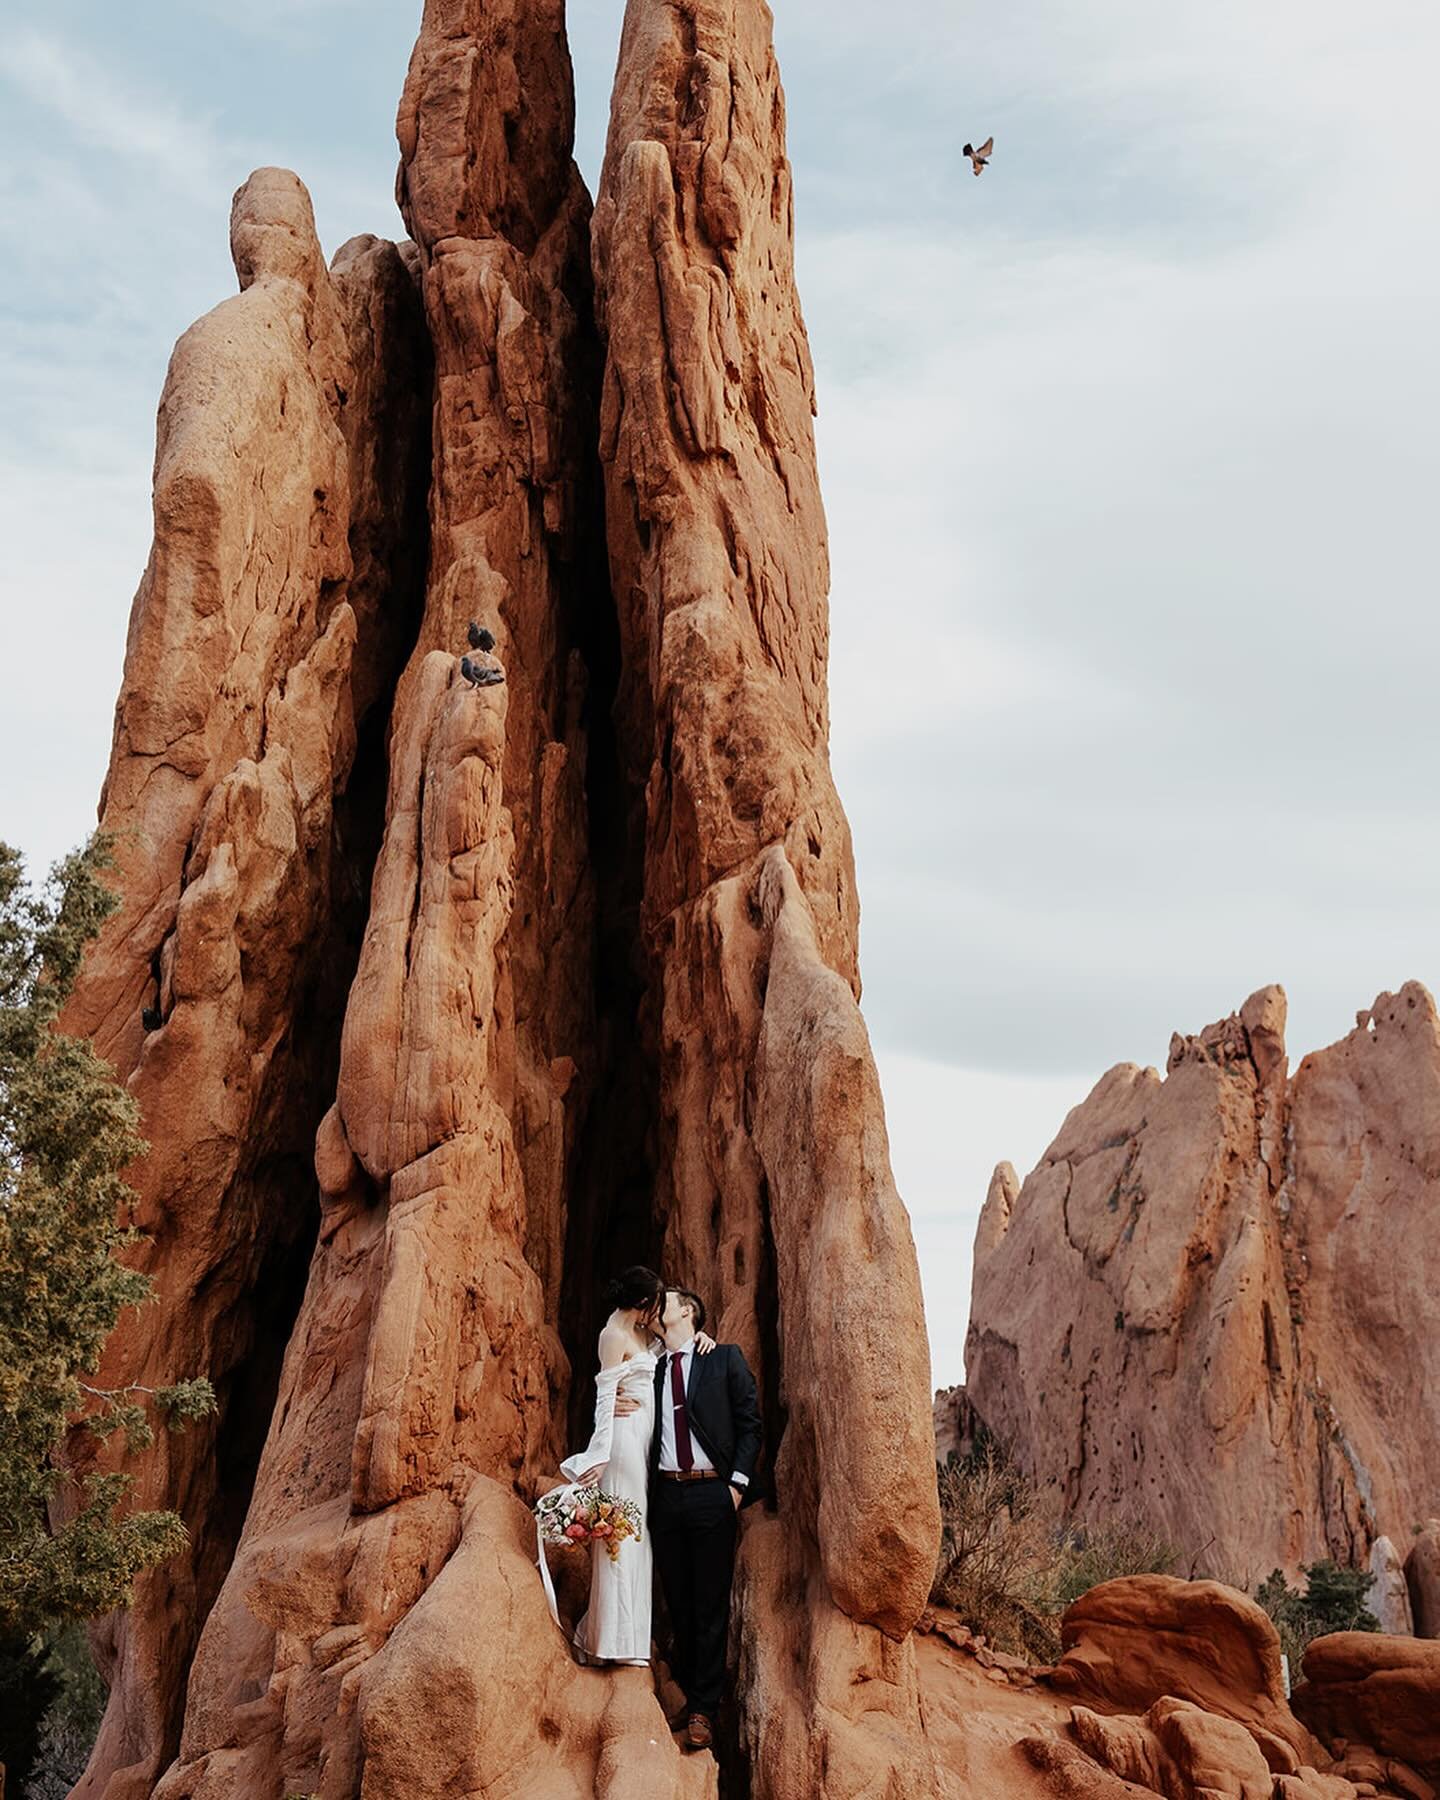 Eloping in Colorado is pretty cool if you ask me 🗻💛

. . .
Photographers | @melissa.anne.photo + @stefanievanessaphoto 
Floral | @provisionfloral 
HMUA | @b.renhair + @carlydaymakeup 
Models | @model.couple.colorado 

. . .
Mountain elopement, wedd